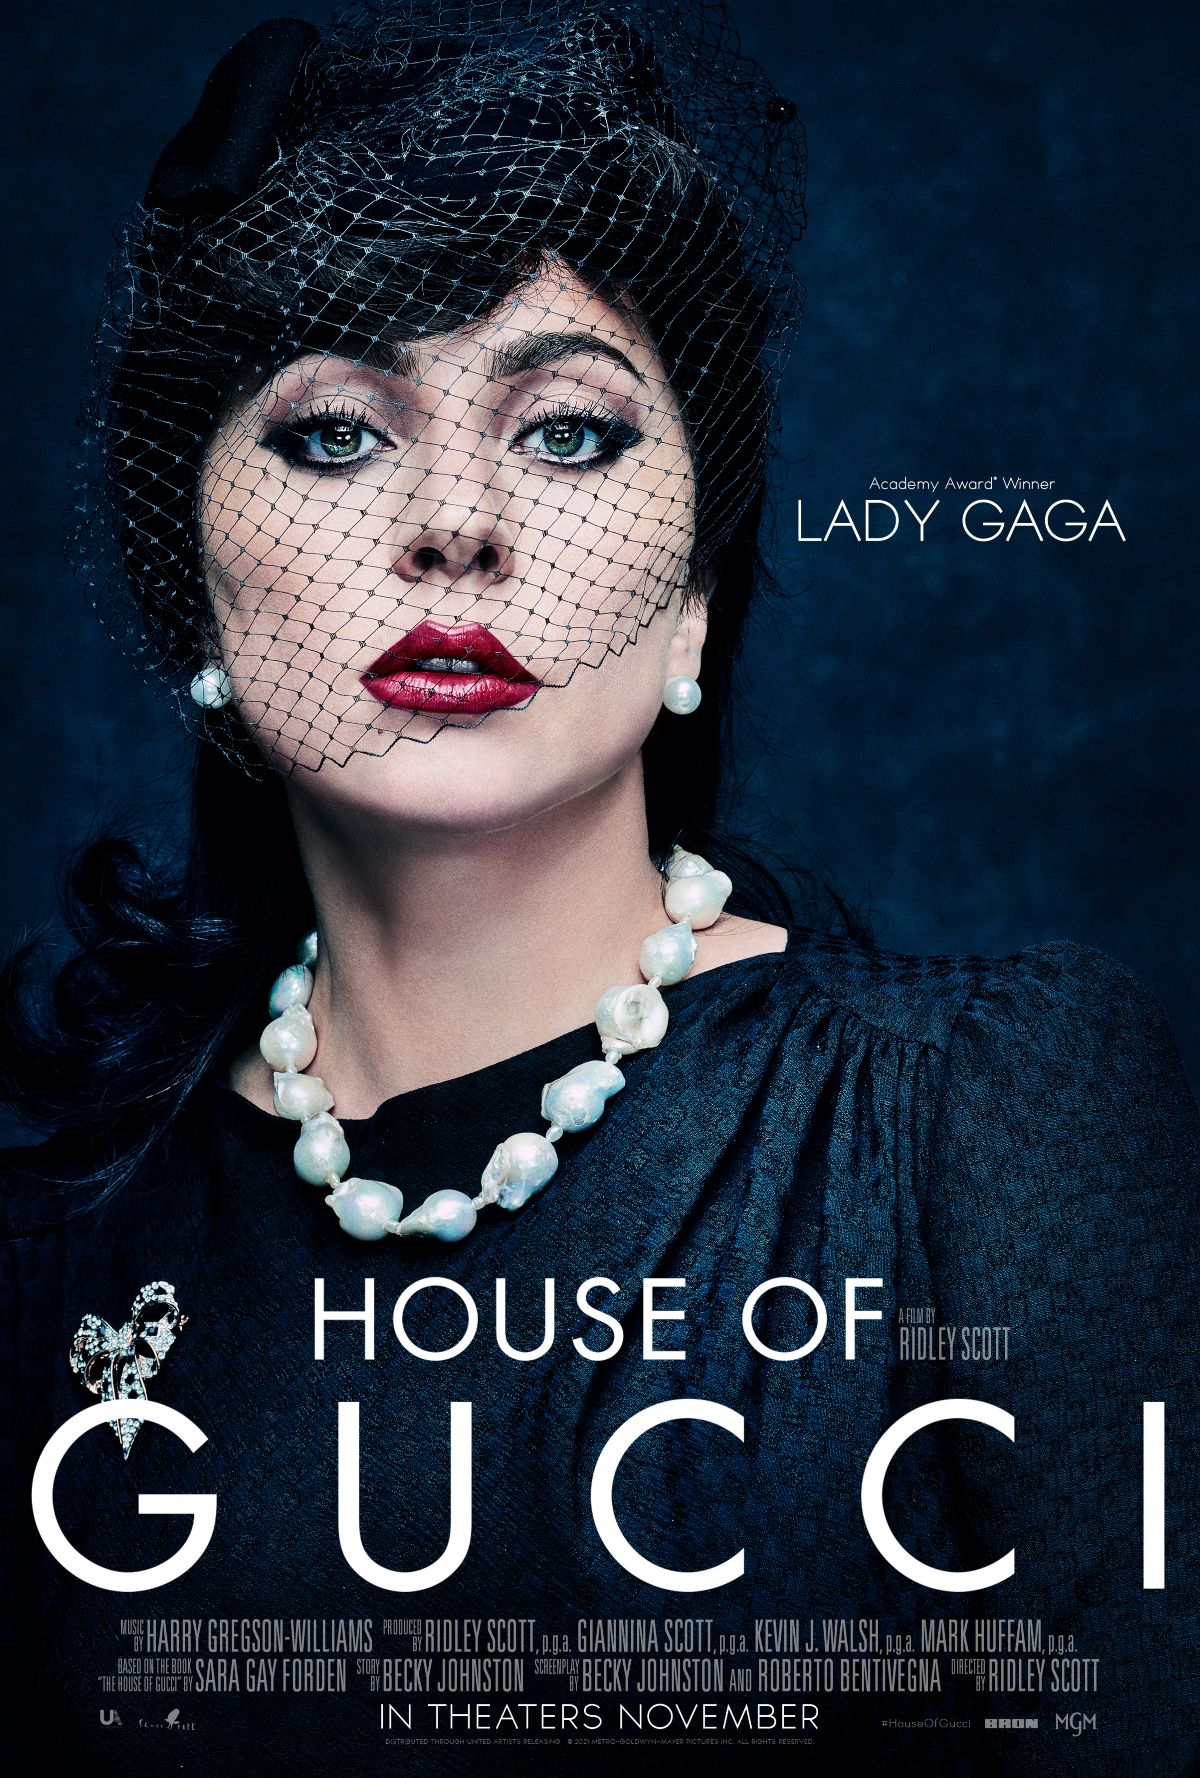 house-of-gucci-character-poster-lady-gaga